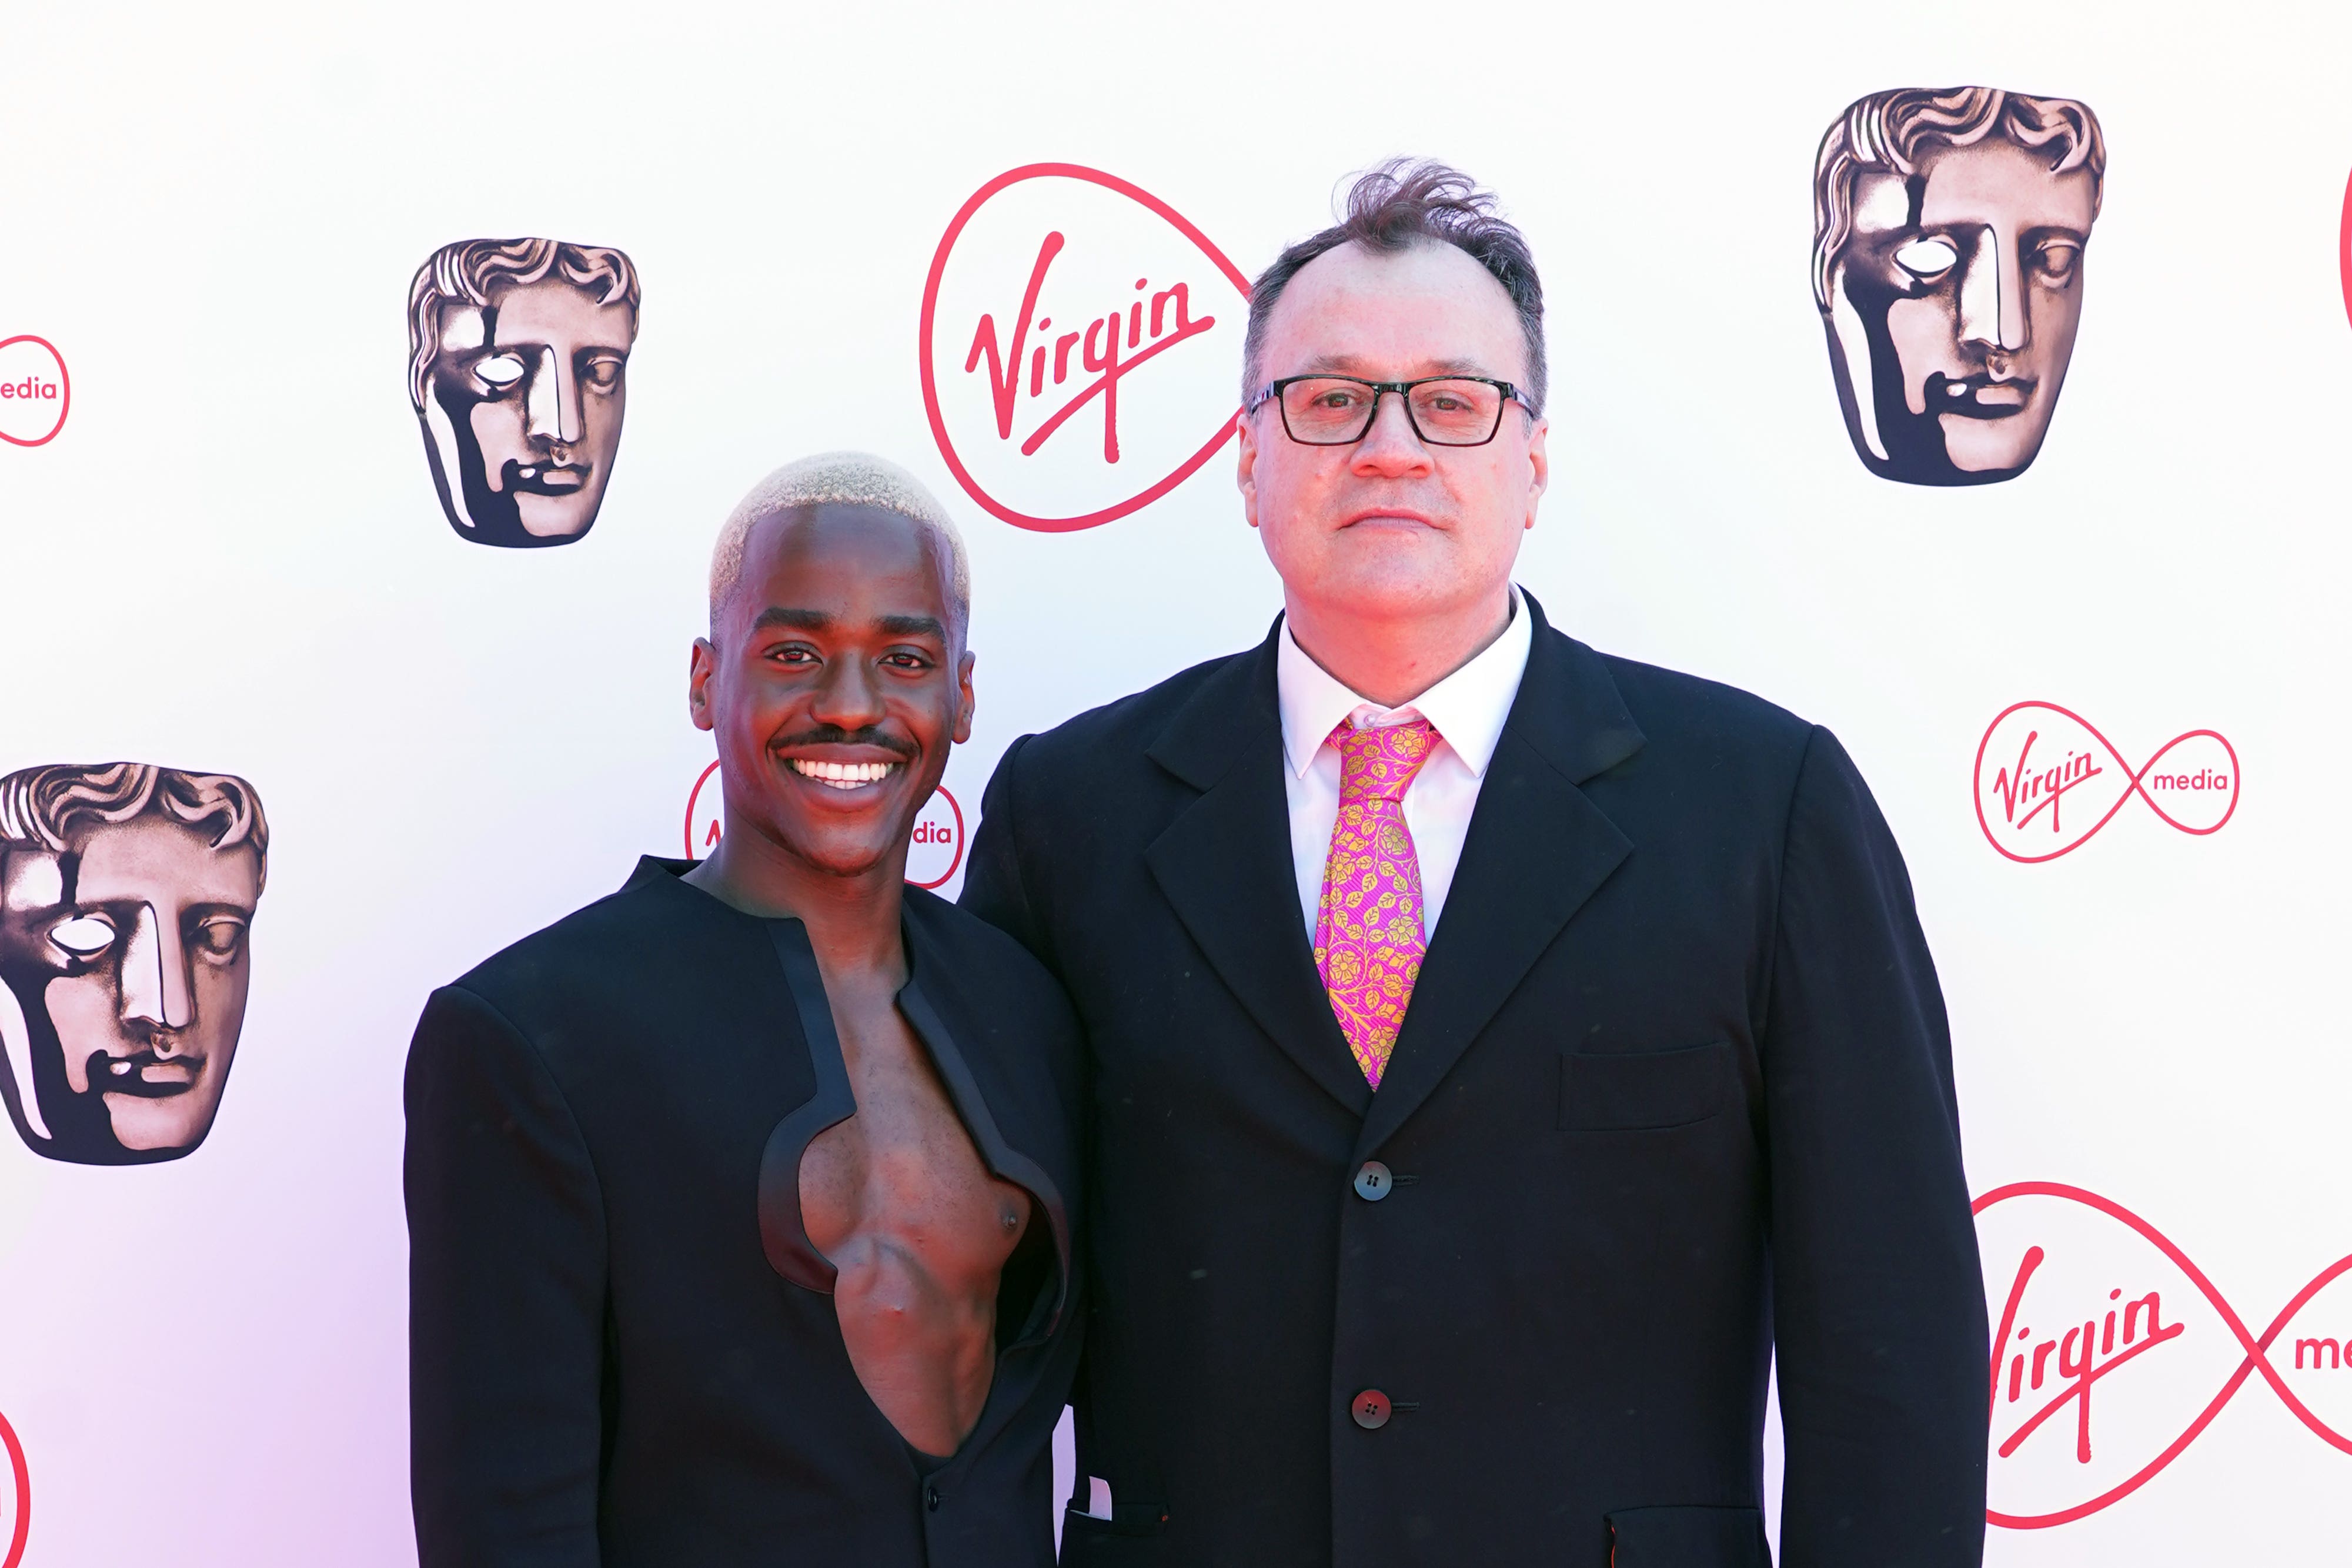 Ncuti Gatwa and Russell T Davies attending the Virgin Bafta TV Awards 2022, at the Royal Festival Hall in London in May 2022 (Ian West/PA)